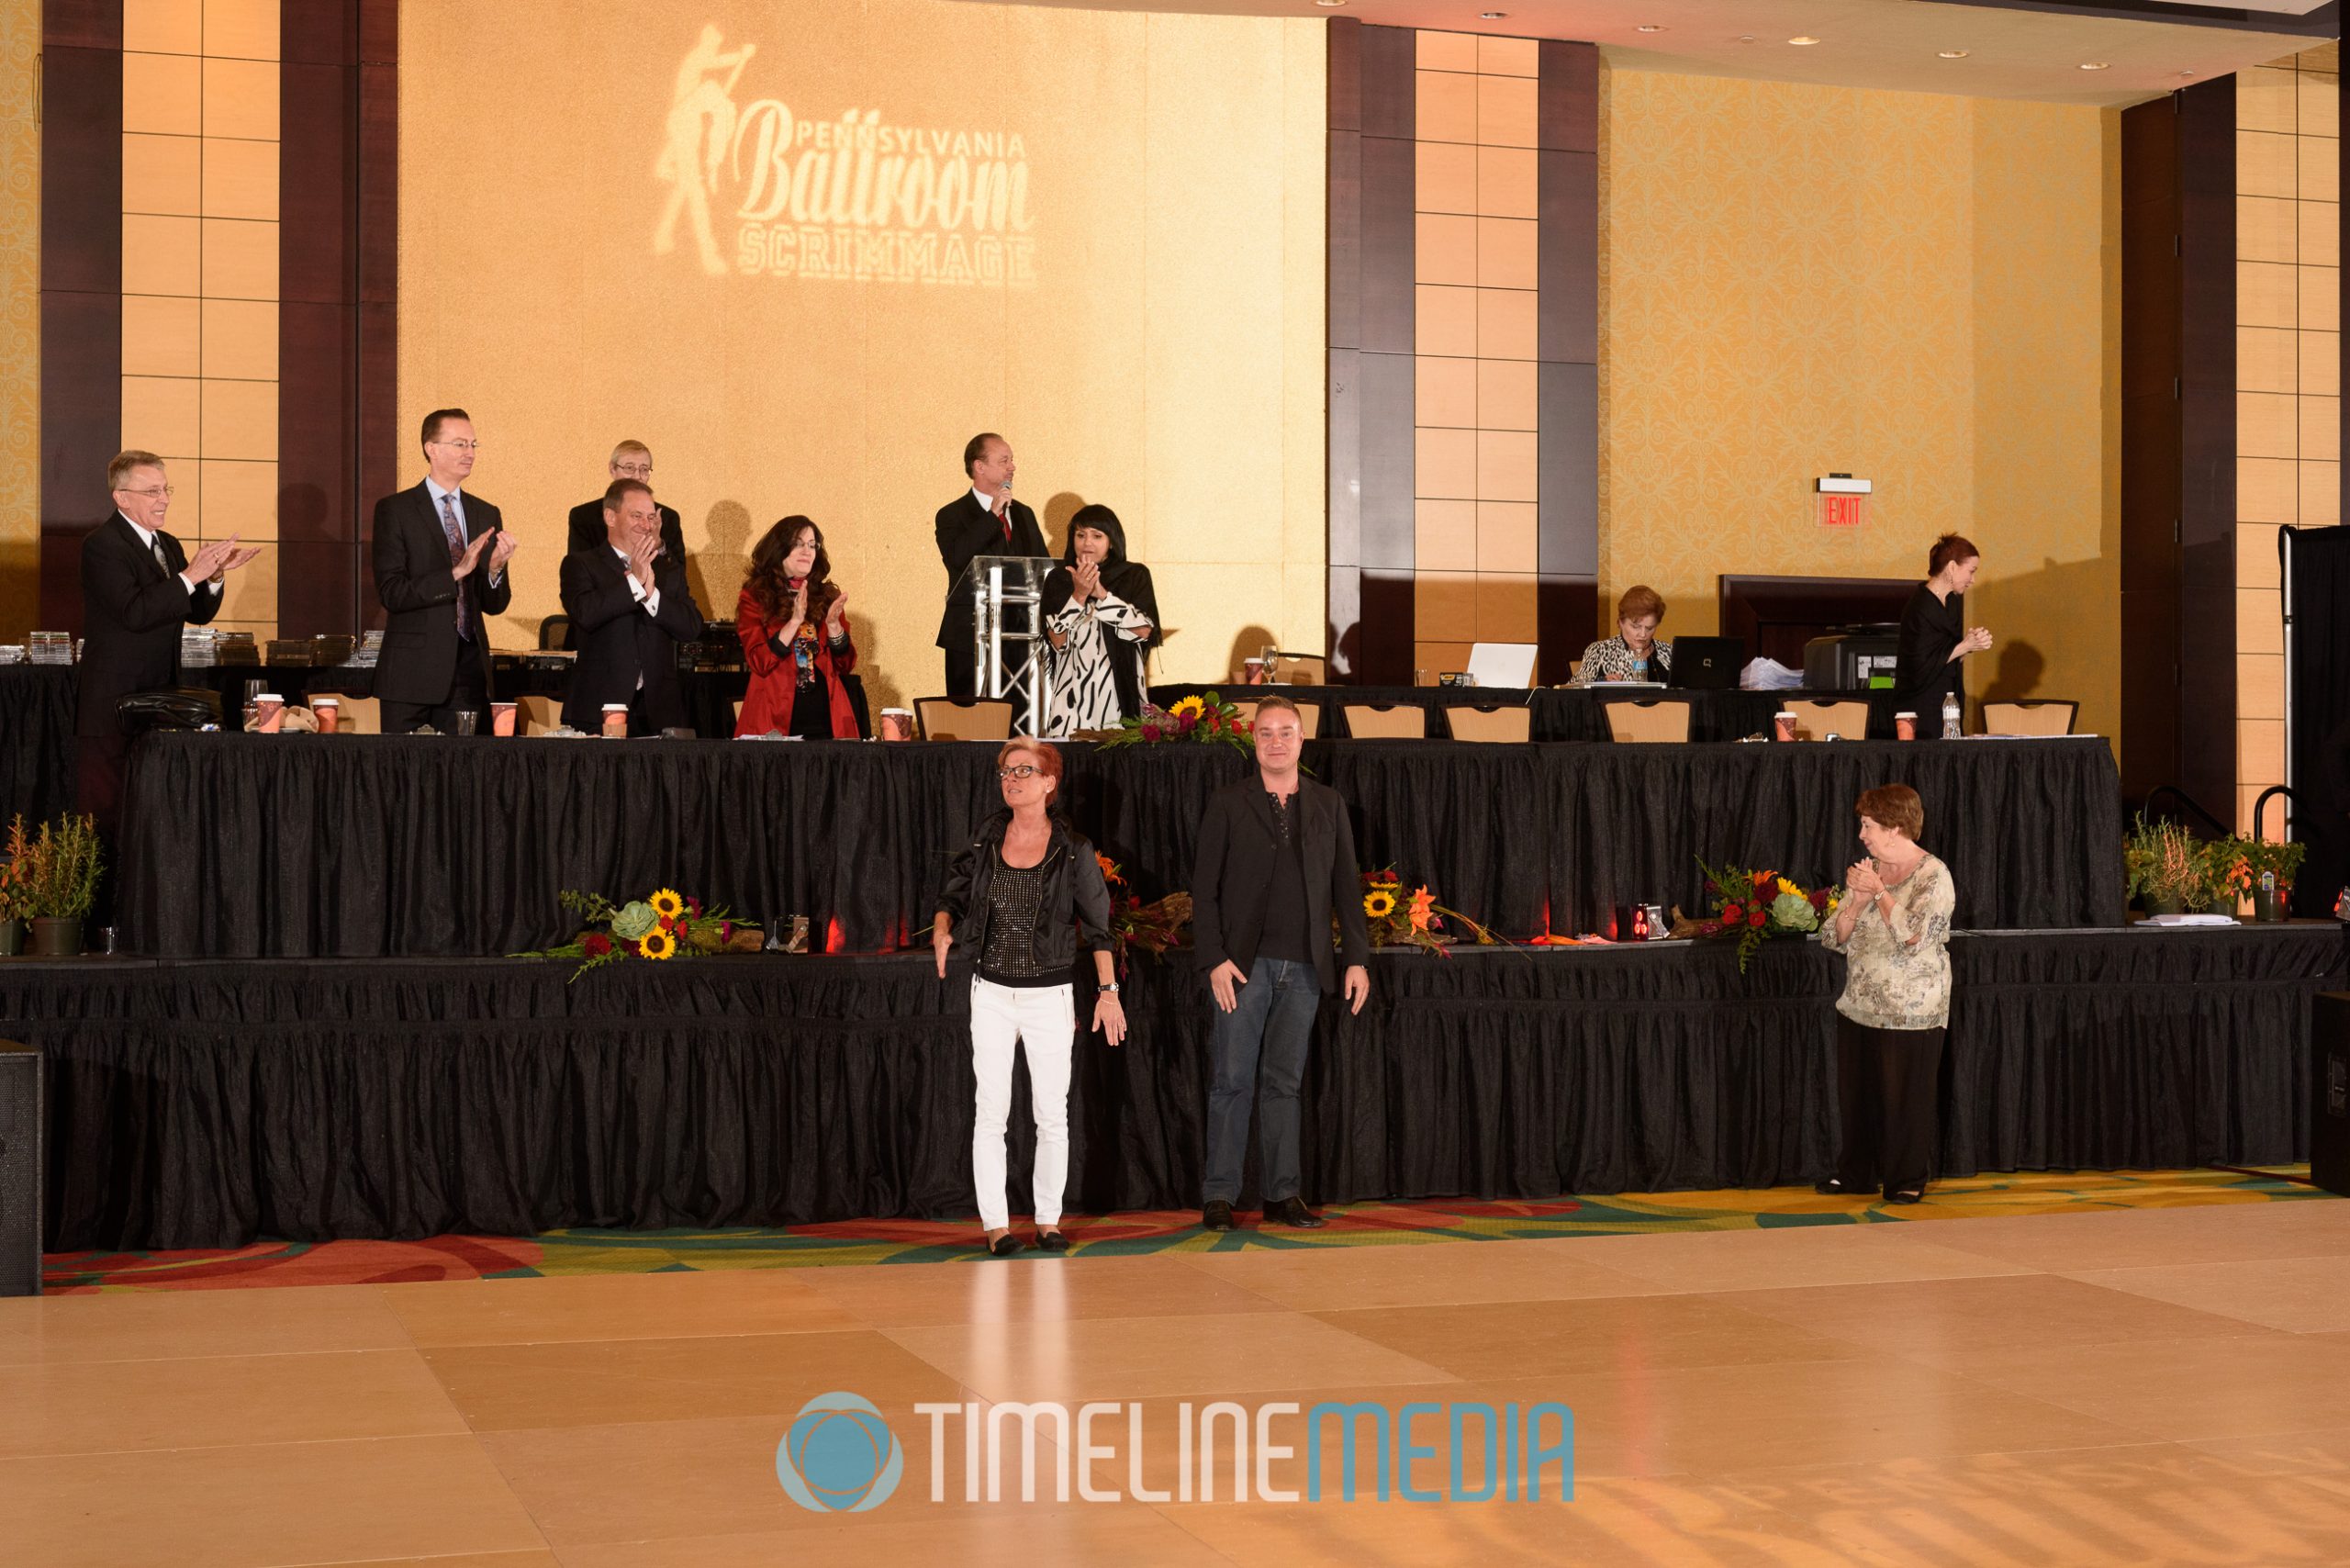 Organizers and Officials - Pennsylvania Ballroom Scrimmage ©TimeLine Media